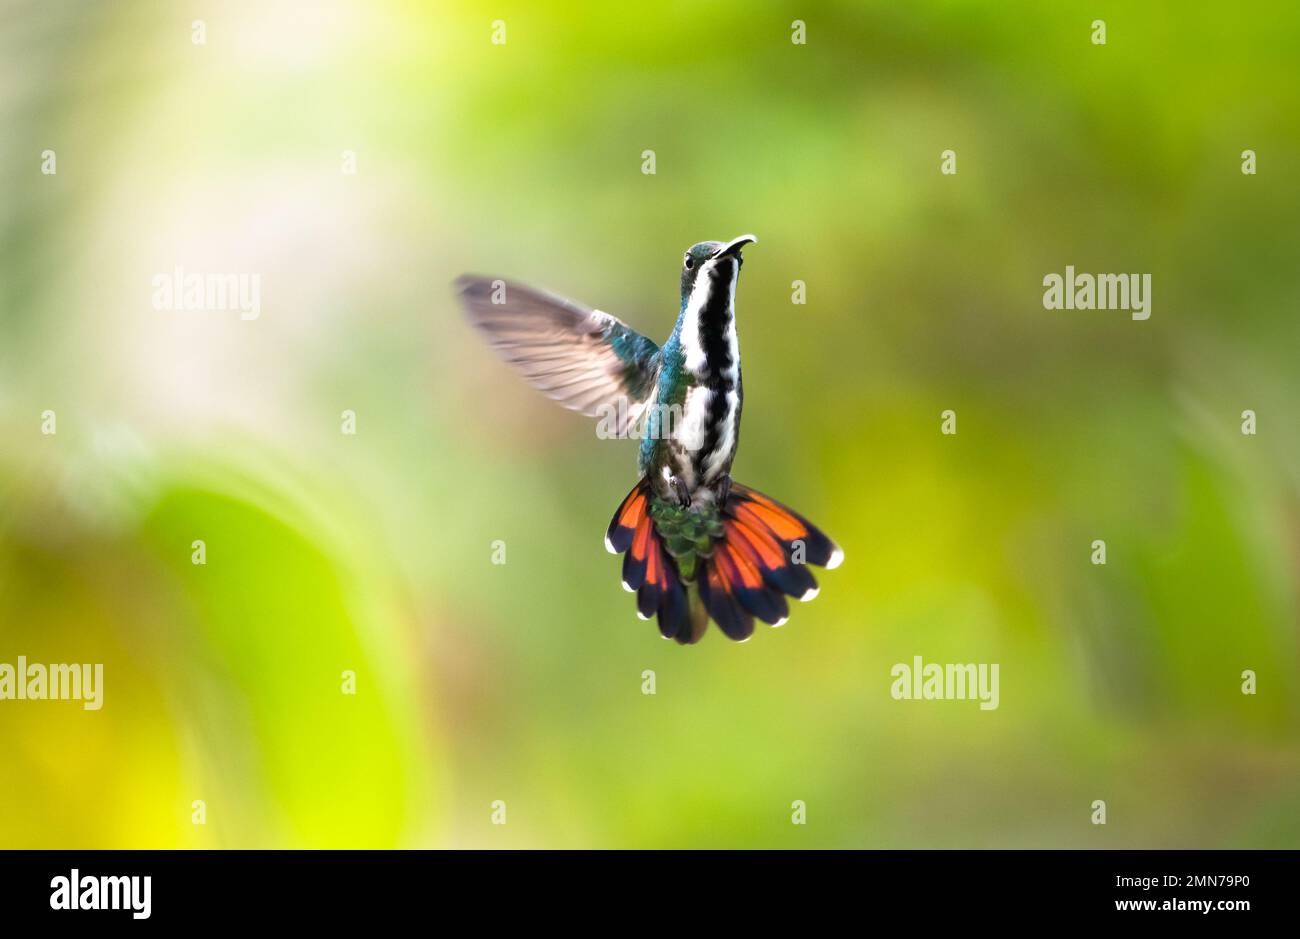 Black-throated Mango hummingbird, Anthracothorax nigricollis, hovering in the air with a green background. Stock Photo